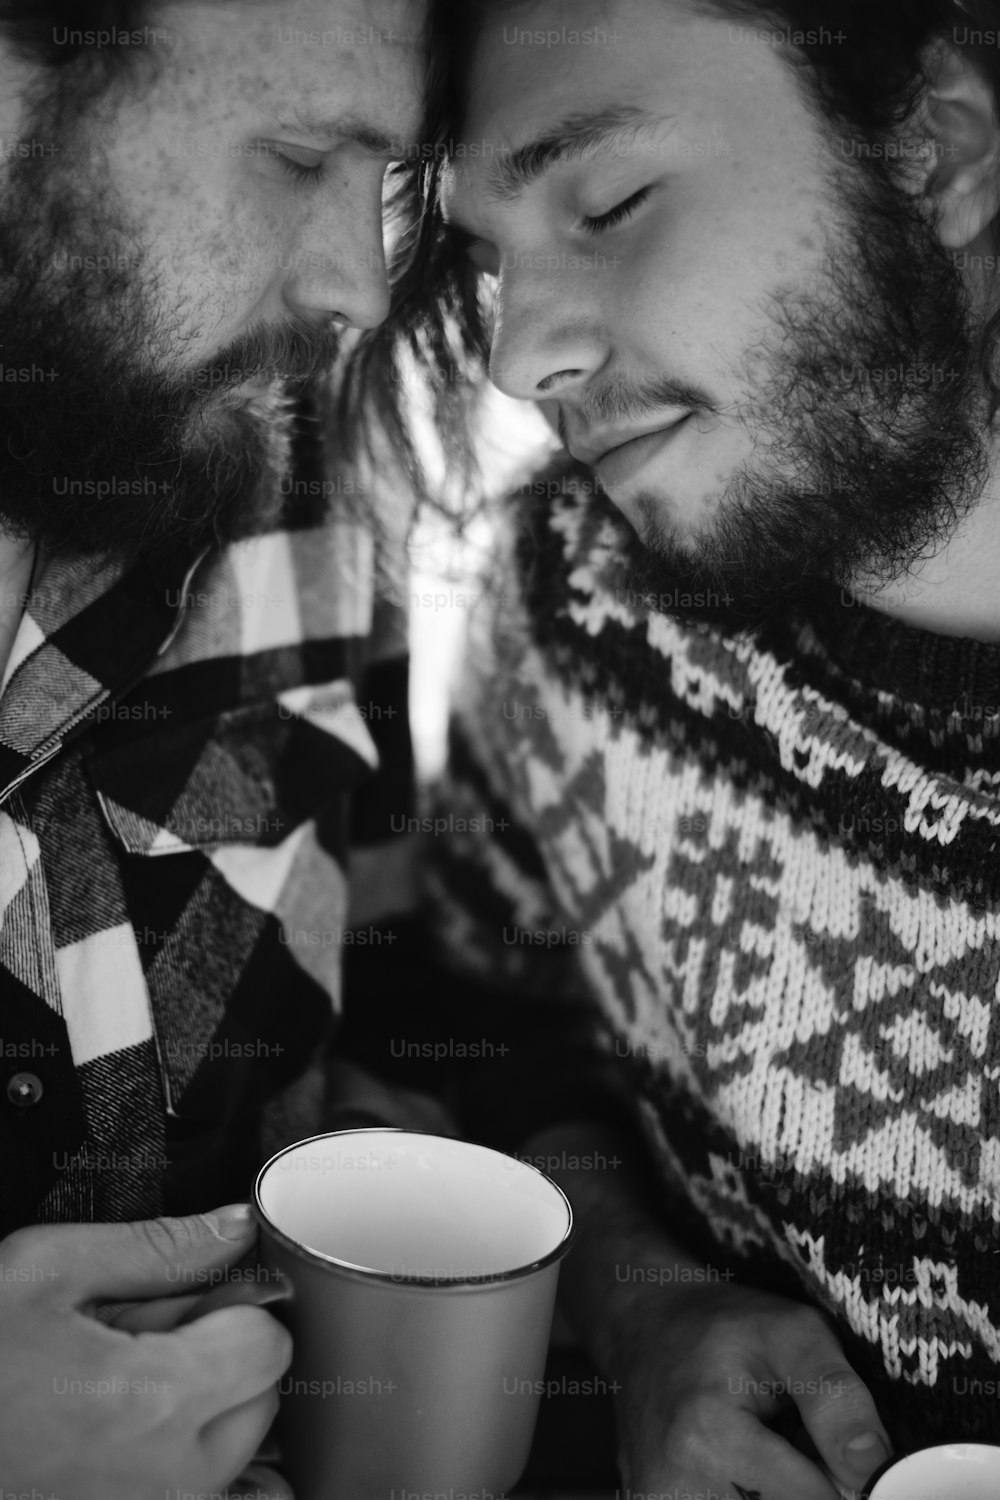 Black and white photo portrait of two bearded men with long hair leaning on each other, they are wearing warm sweater and plaid shirt and holding cups in hands